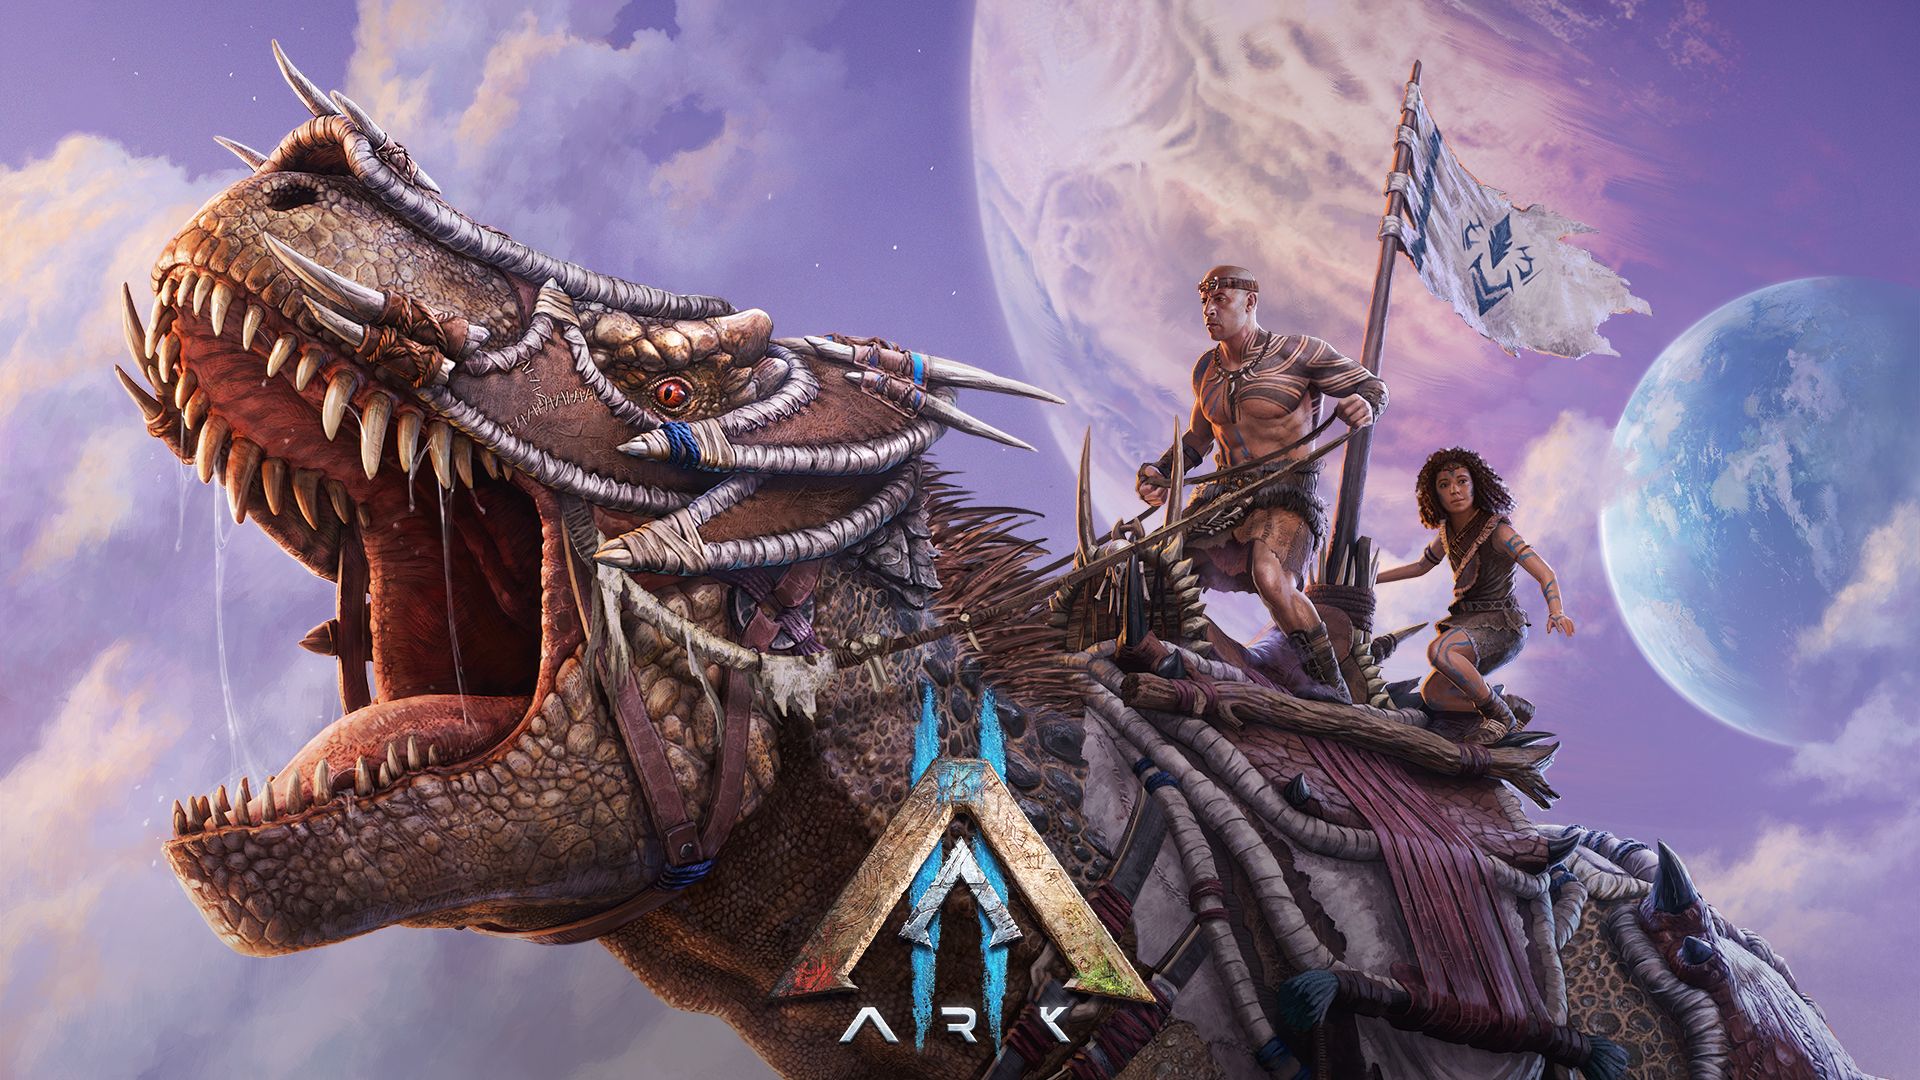 Video For The Future of Survival Games Begins with Ark 2